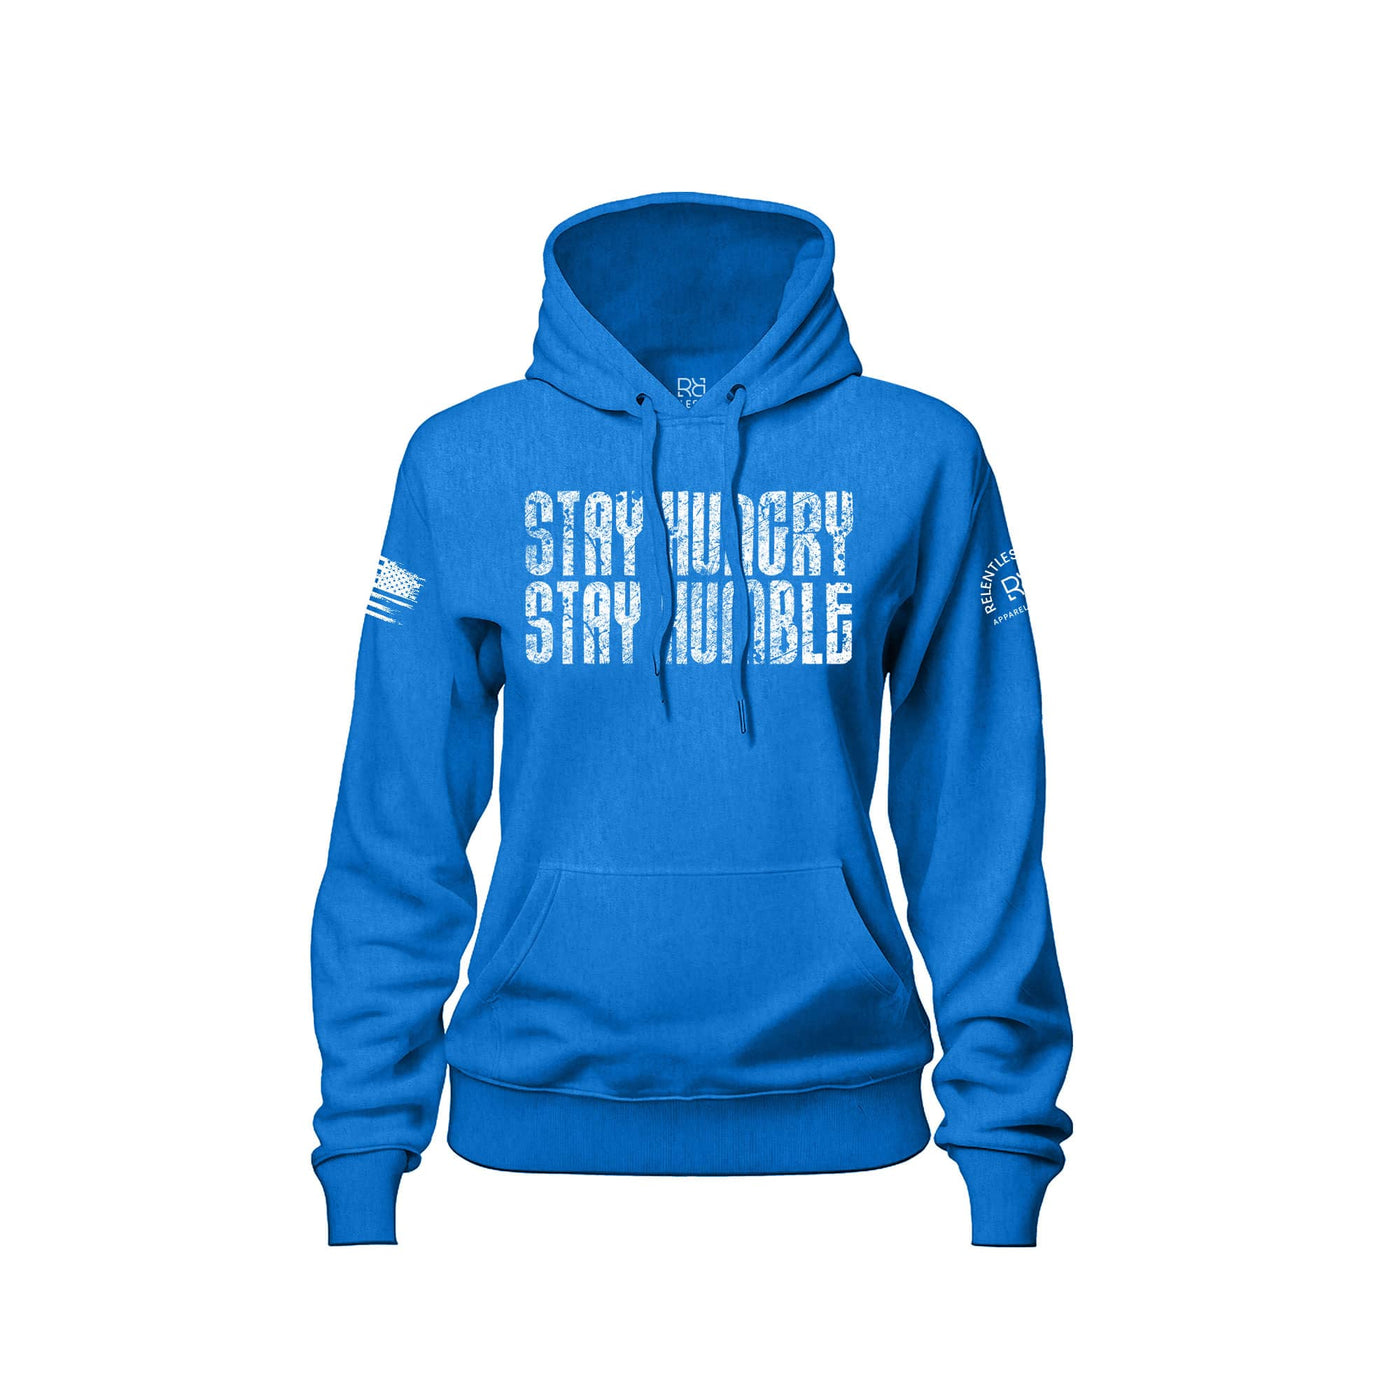 Stay Hungry Stay Humble | Front | Women's Hoodie